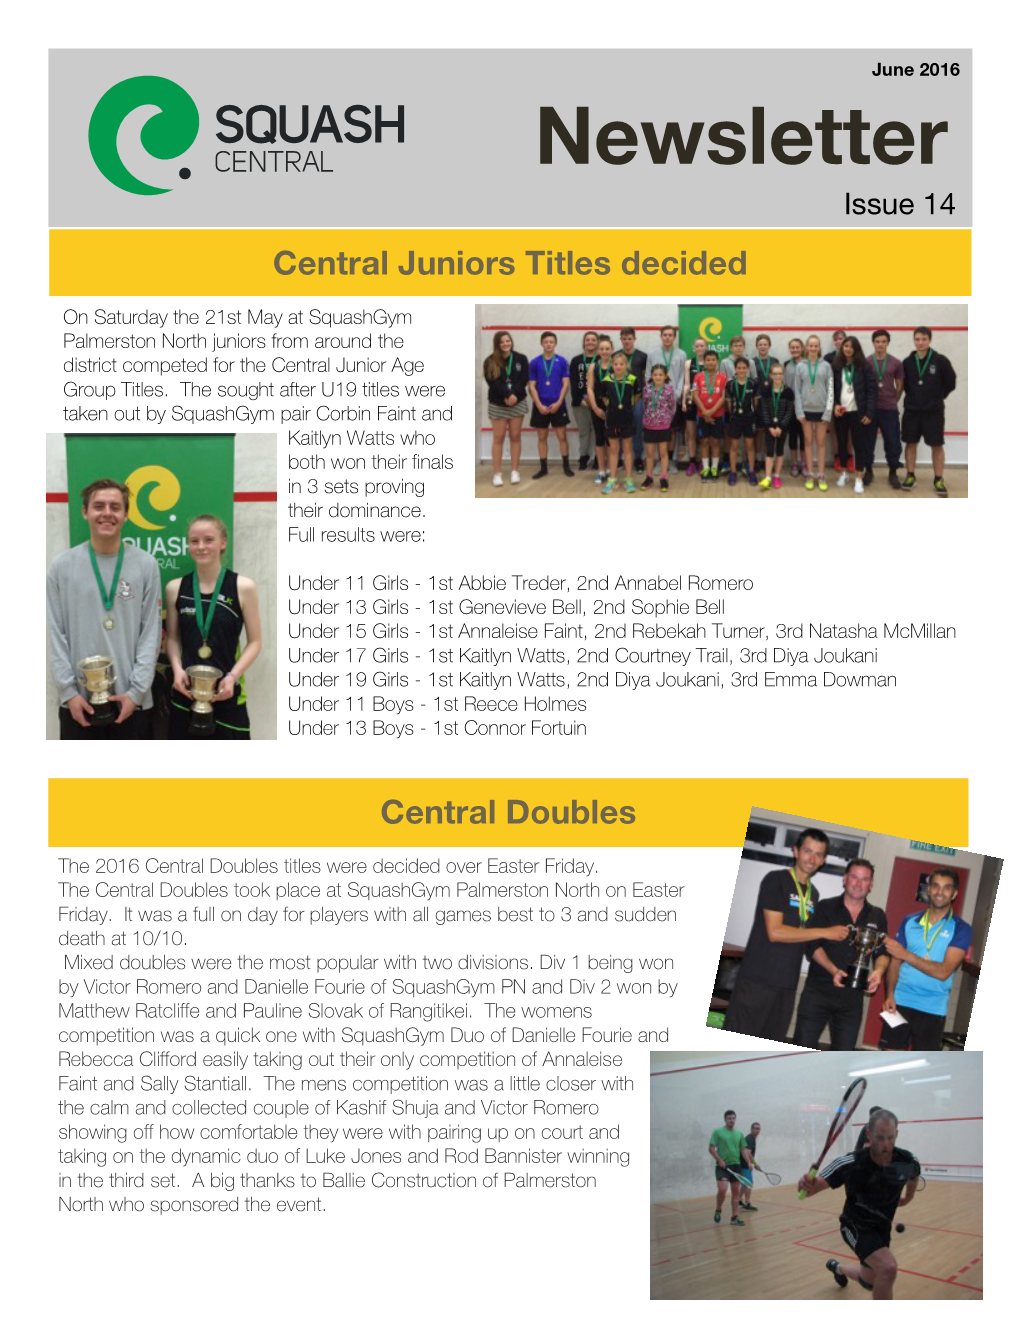 Newsletter Issue 14 Central Juniors Titles Decided